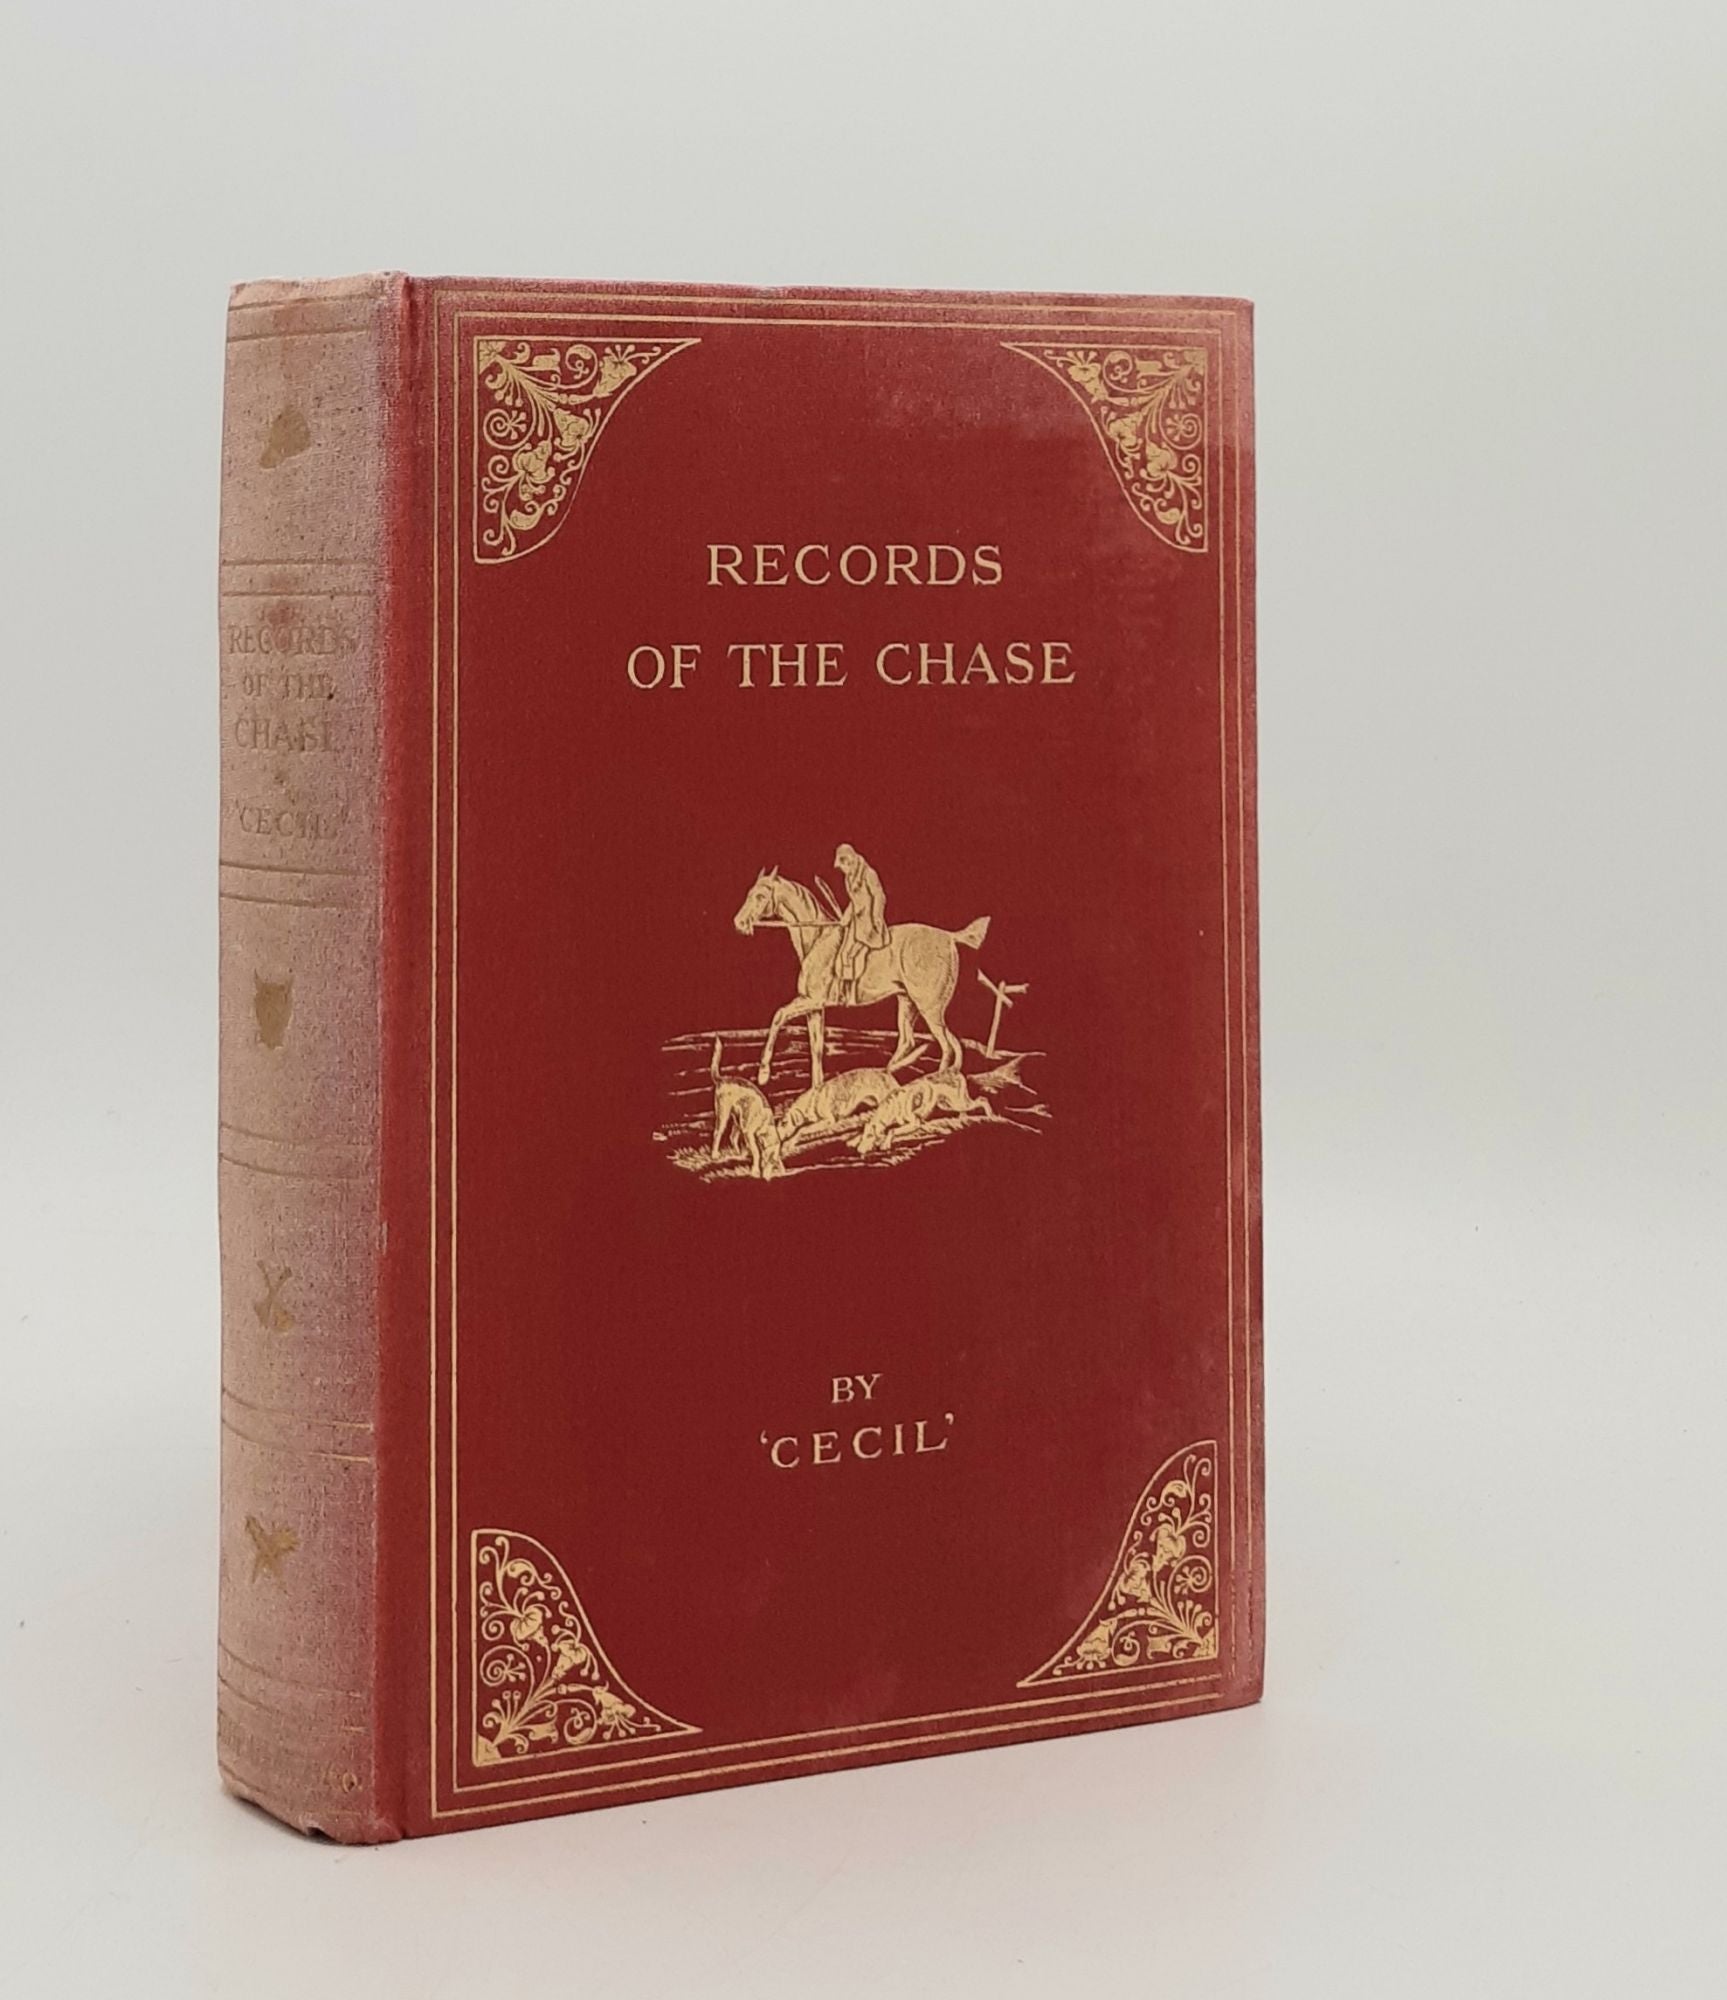 CECIL [Cornelius Tongue] - Records of the Chase and Memoirs of Celebrated Sportsmen Illustrating Some Usages of Olden Times and Comparing Them with Prevailing Customs